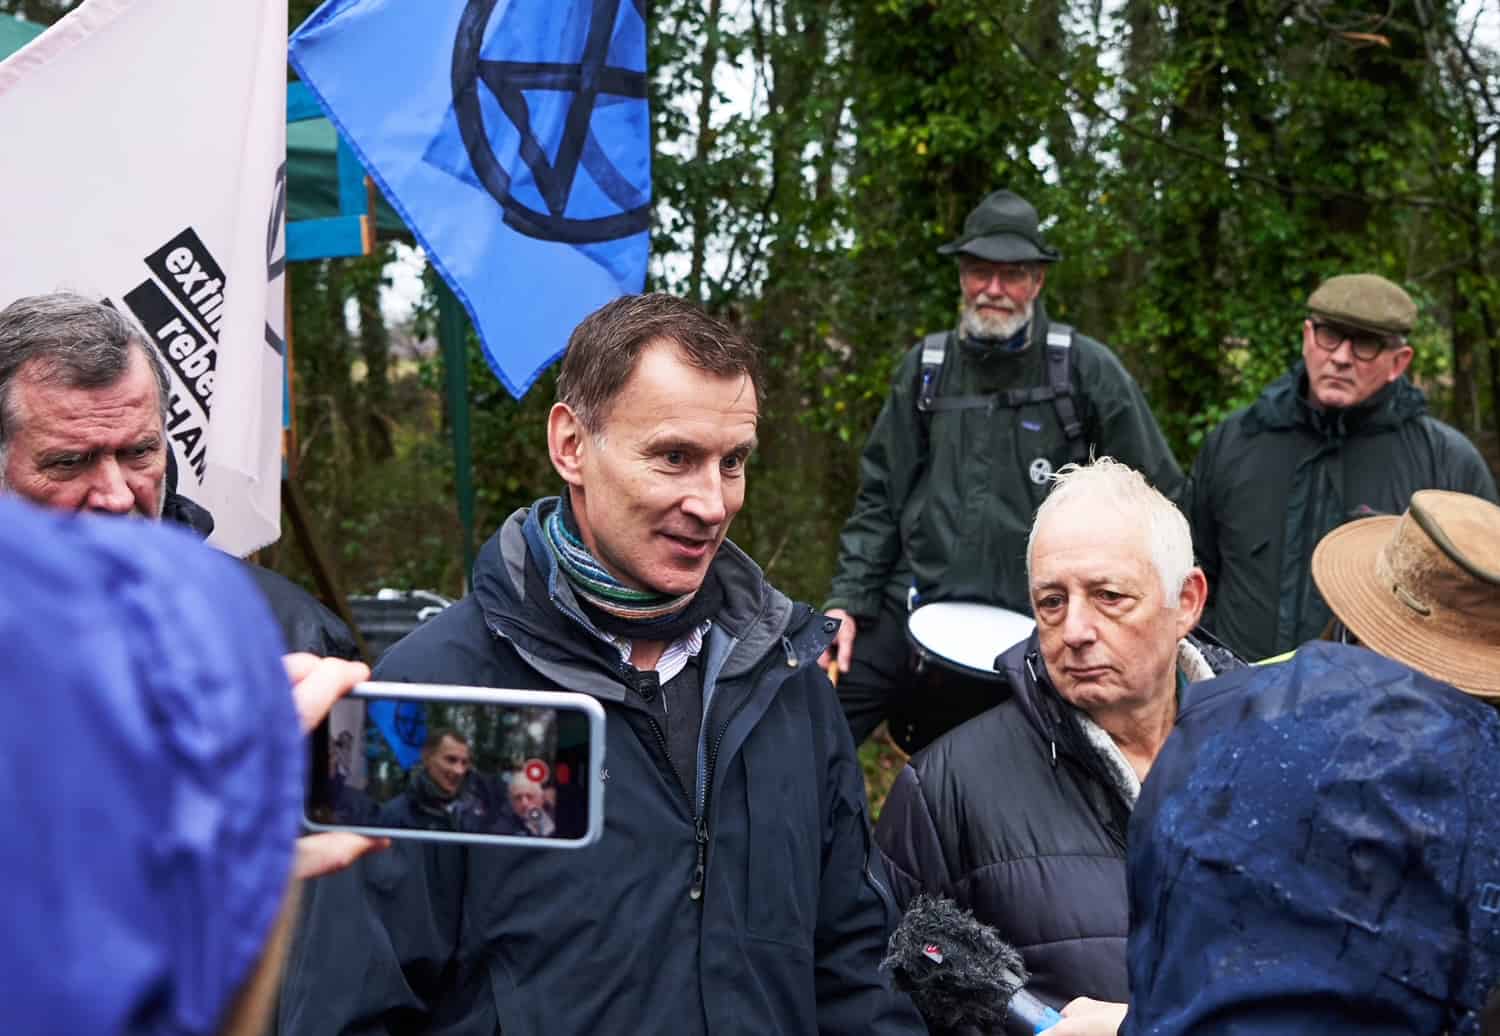 Pictures unearthed of Jeremy Hunt at an Extinction Rebellion protest